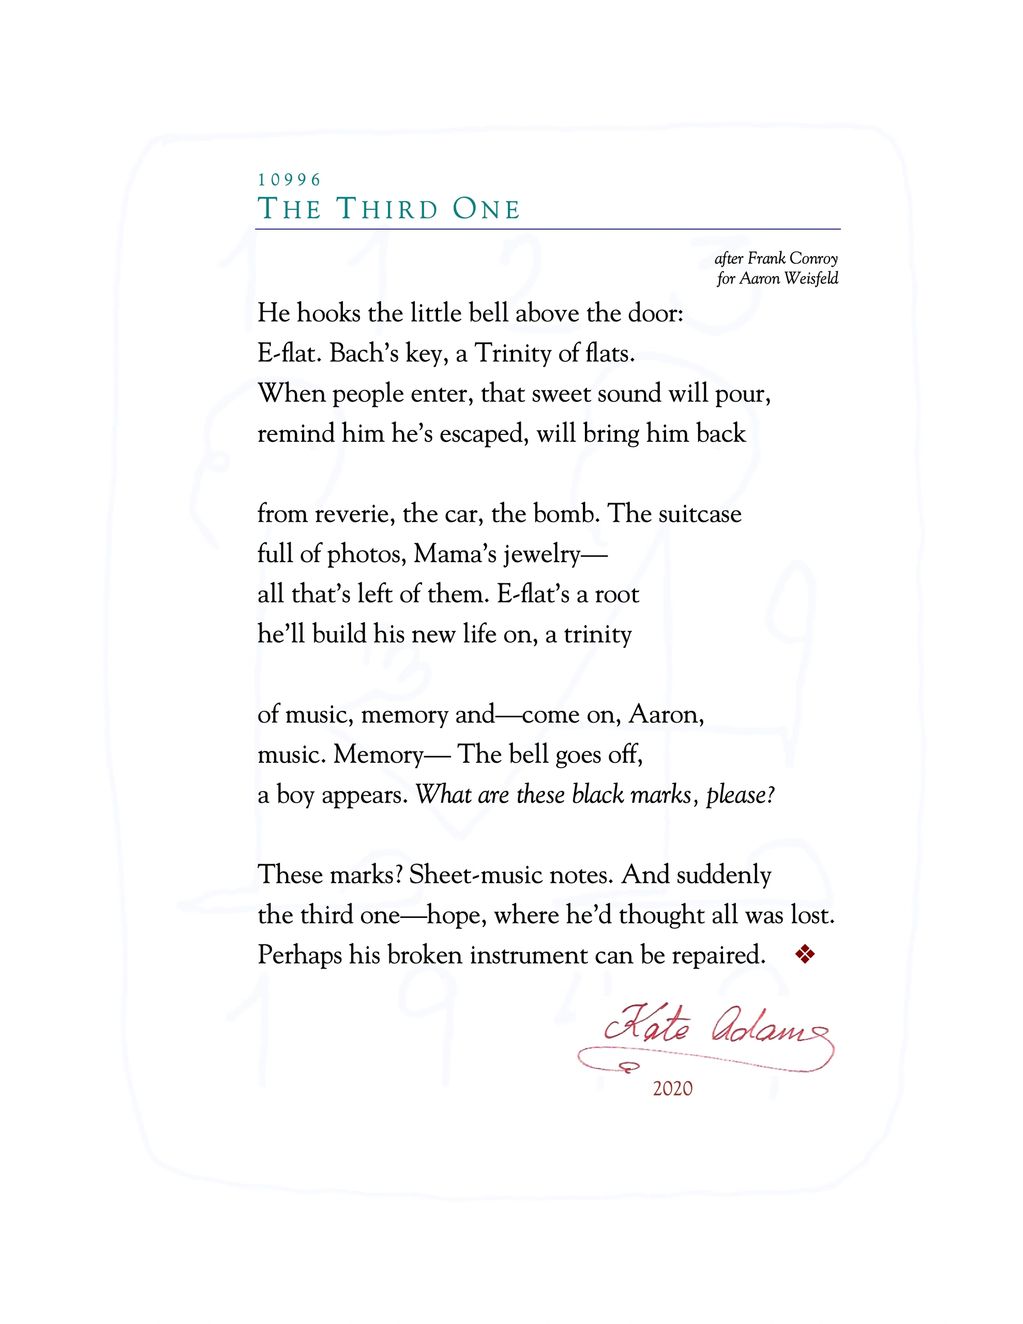 PDF of poem "The Third One"
Conroy, Bach, bomb, bell